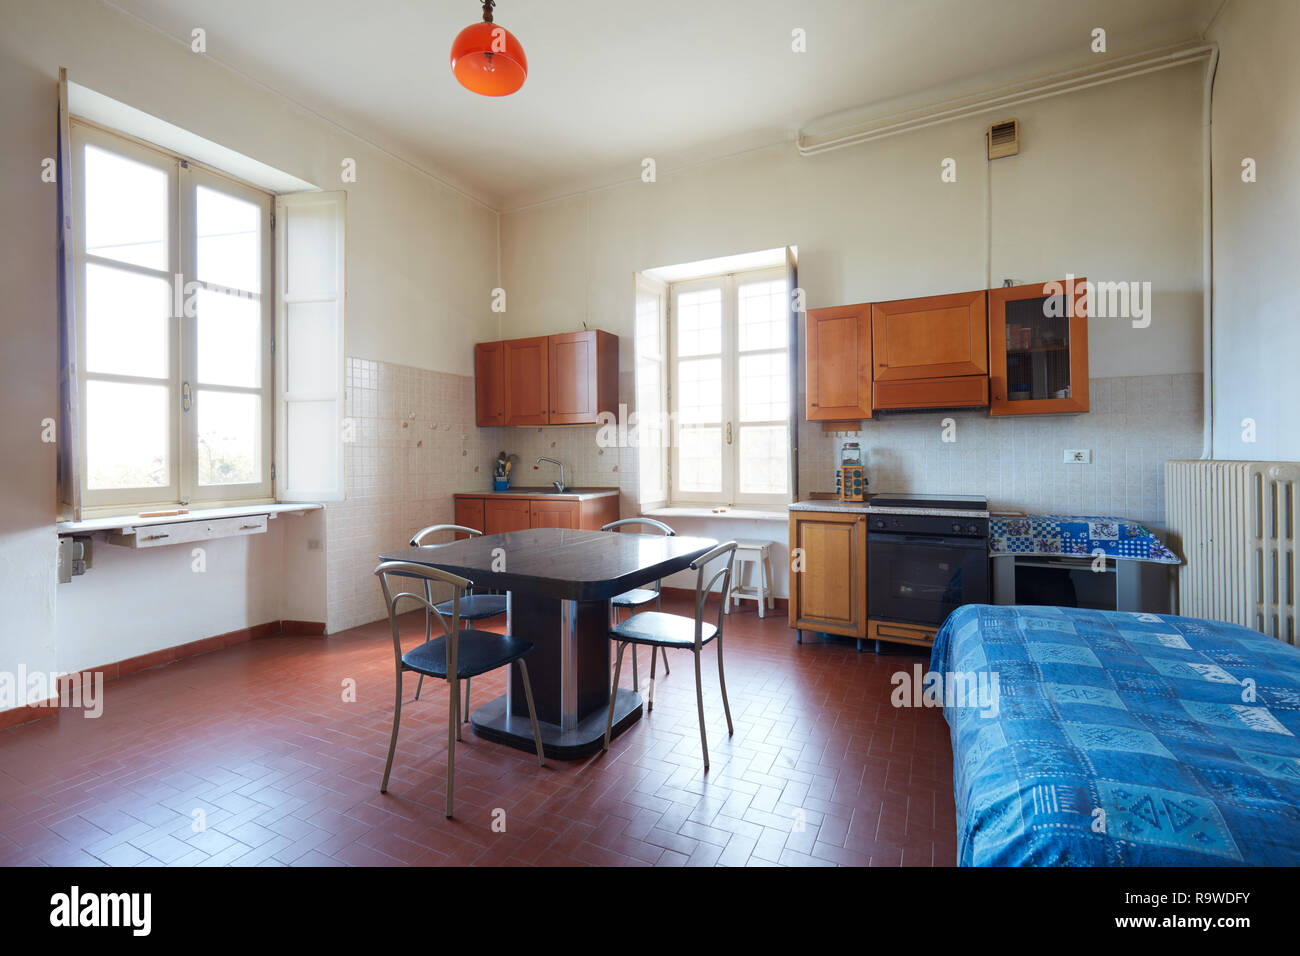 Old kitchen in normal apartment interior in country house Stock Photo